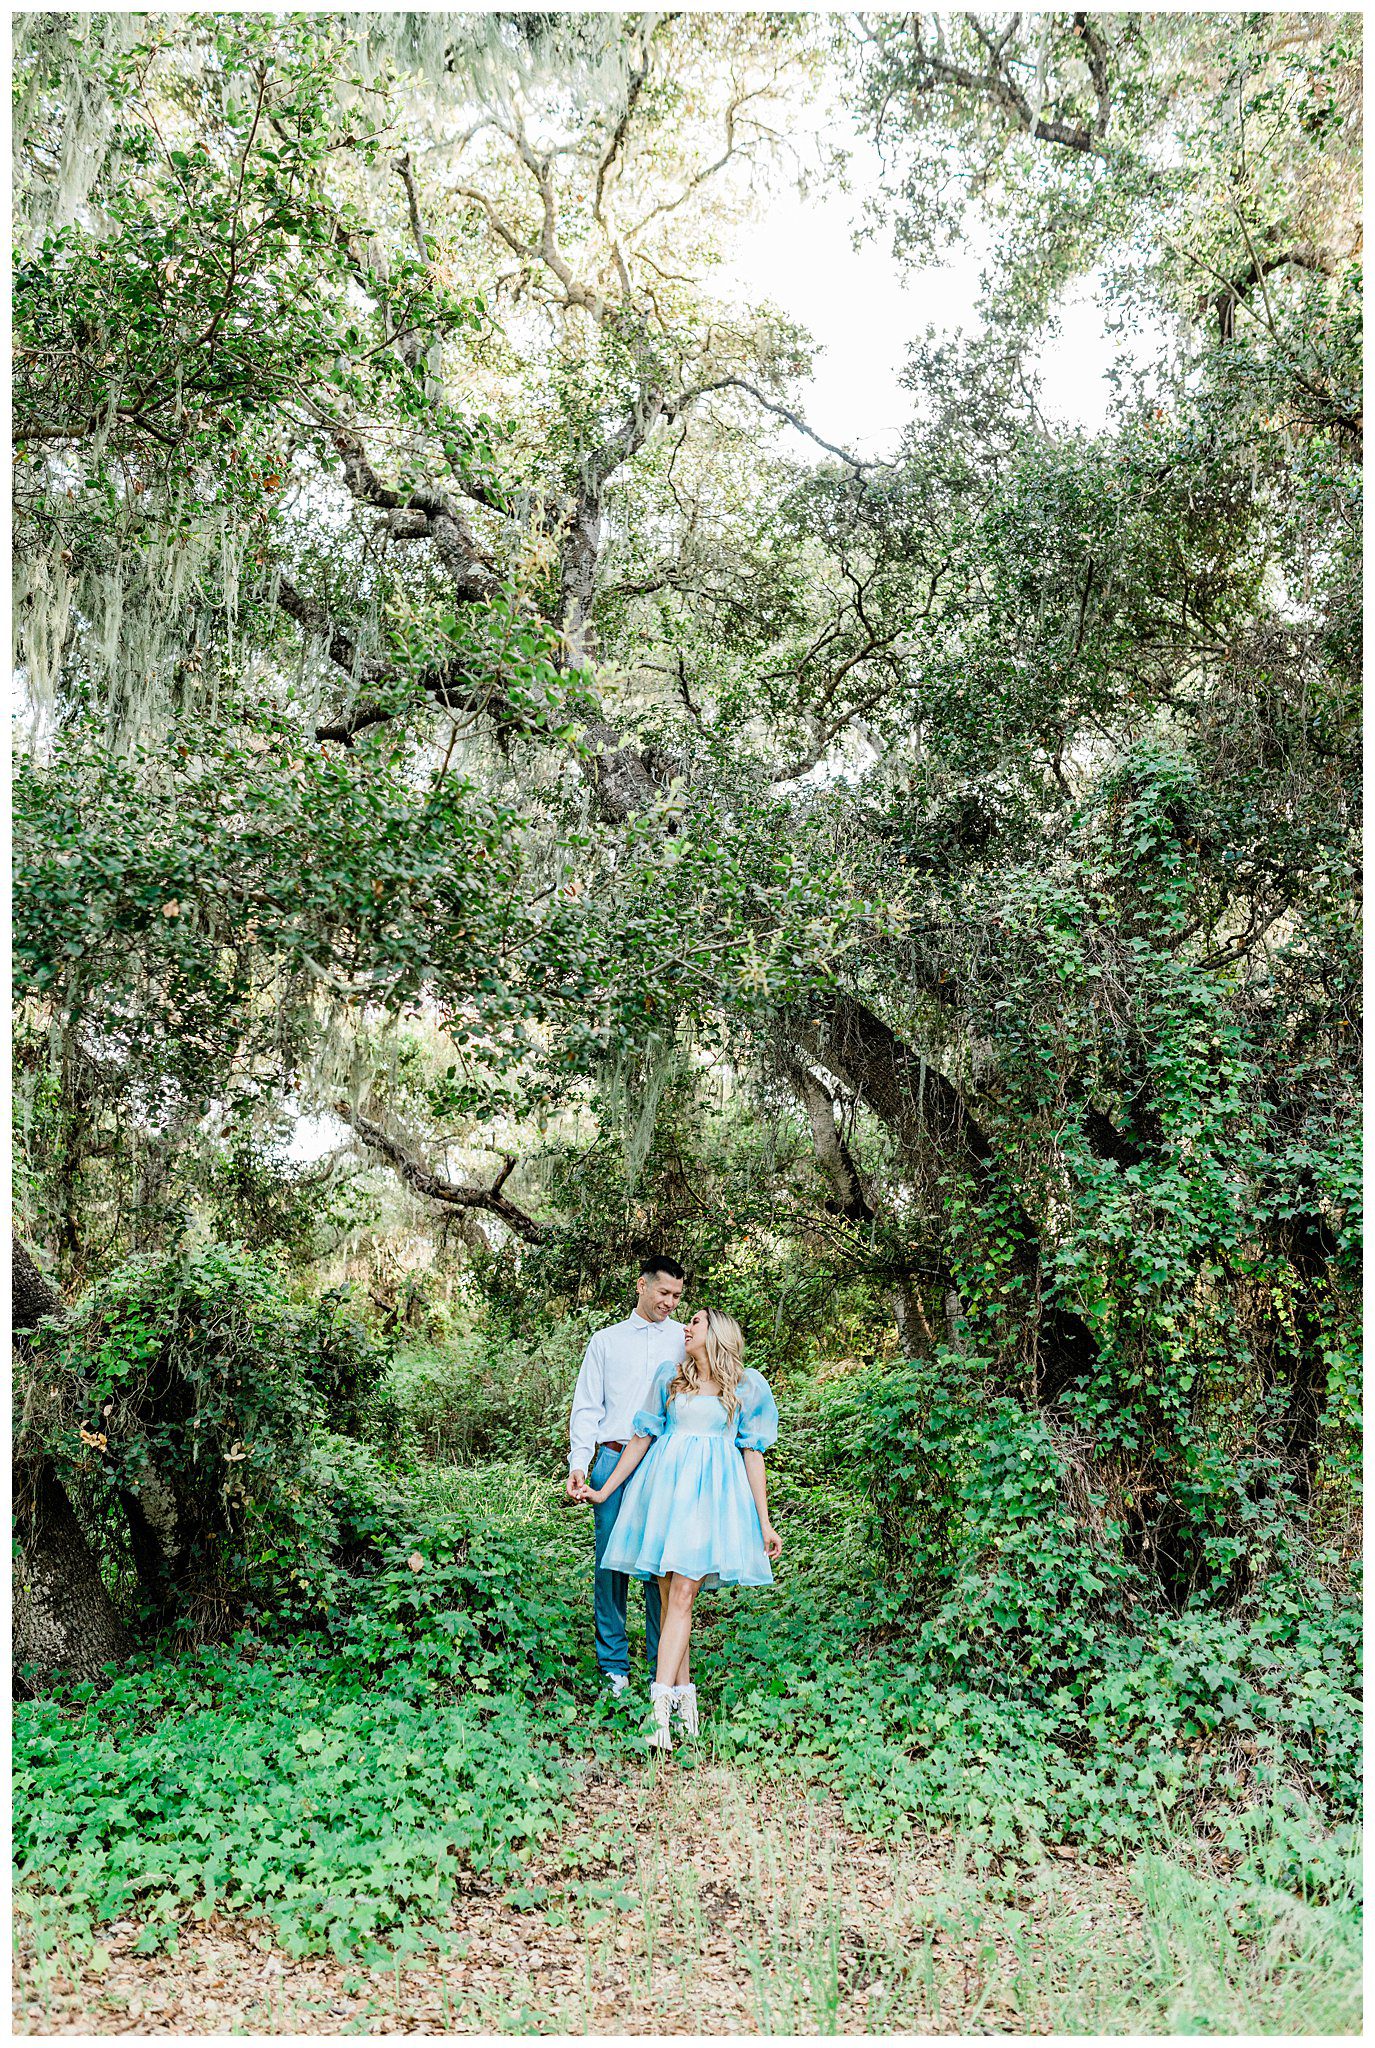 Engaged couple holding hands during a whimsical and fairytale inspired forest engagement session in the Los osos oaks reserve.